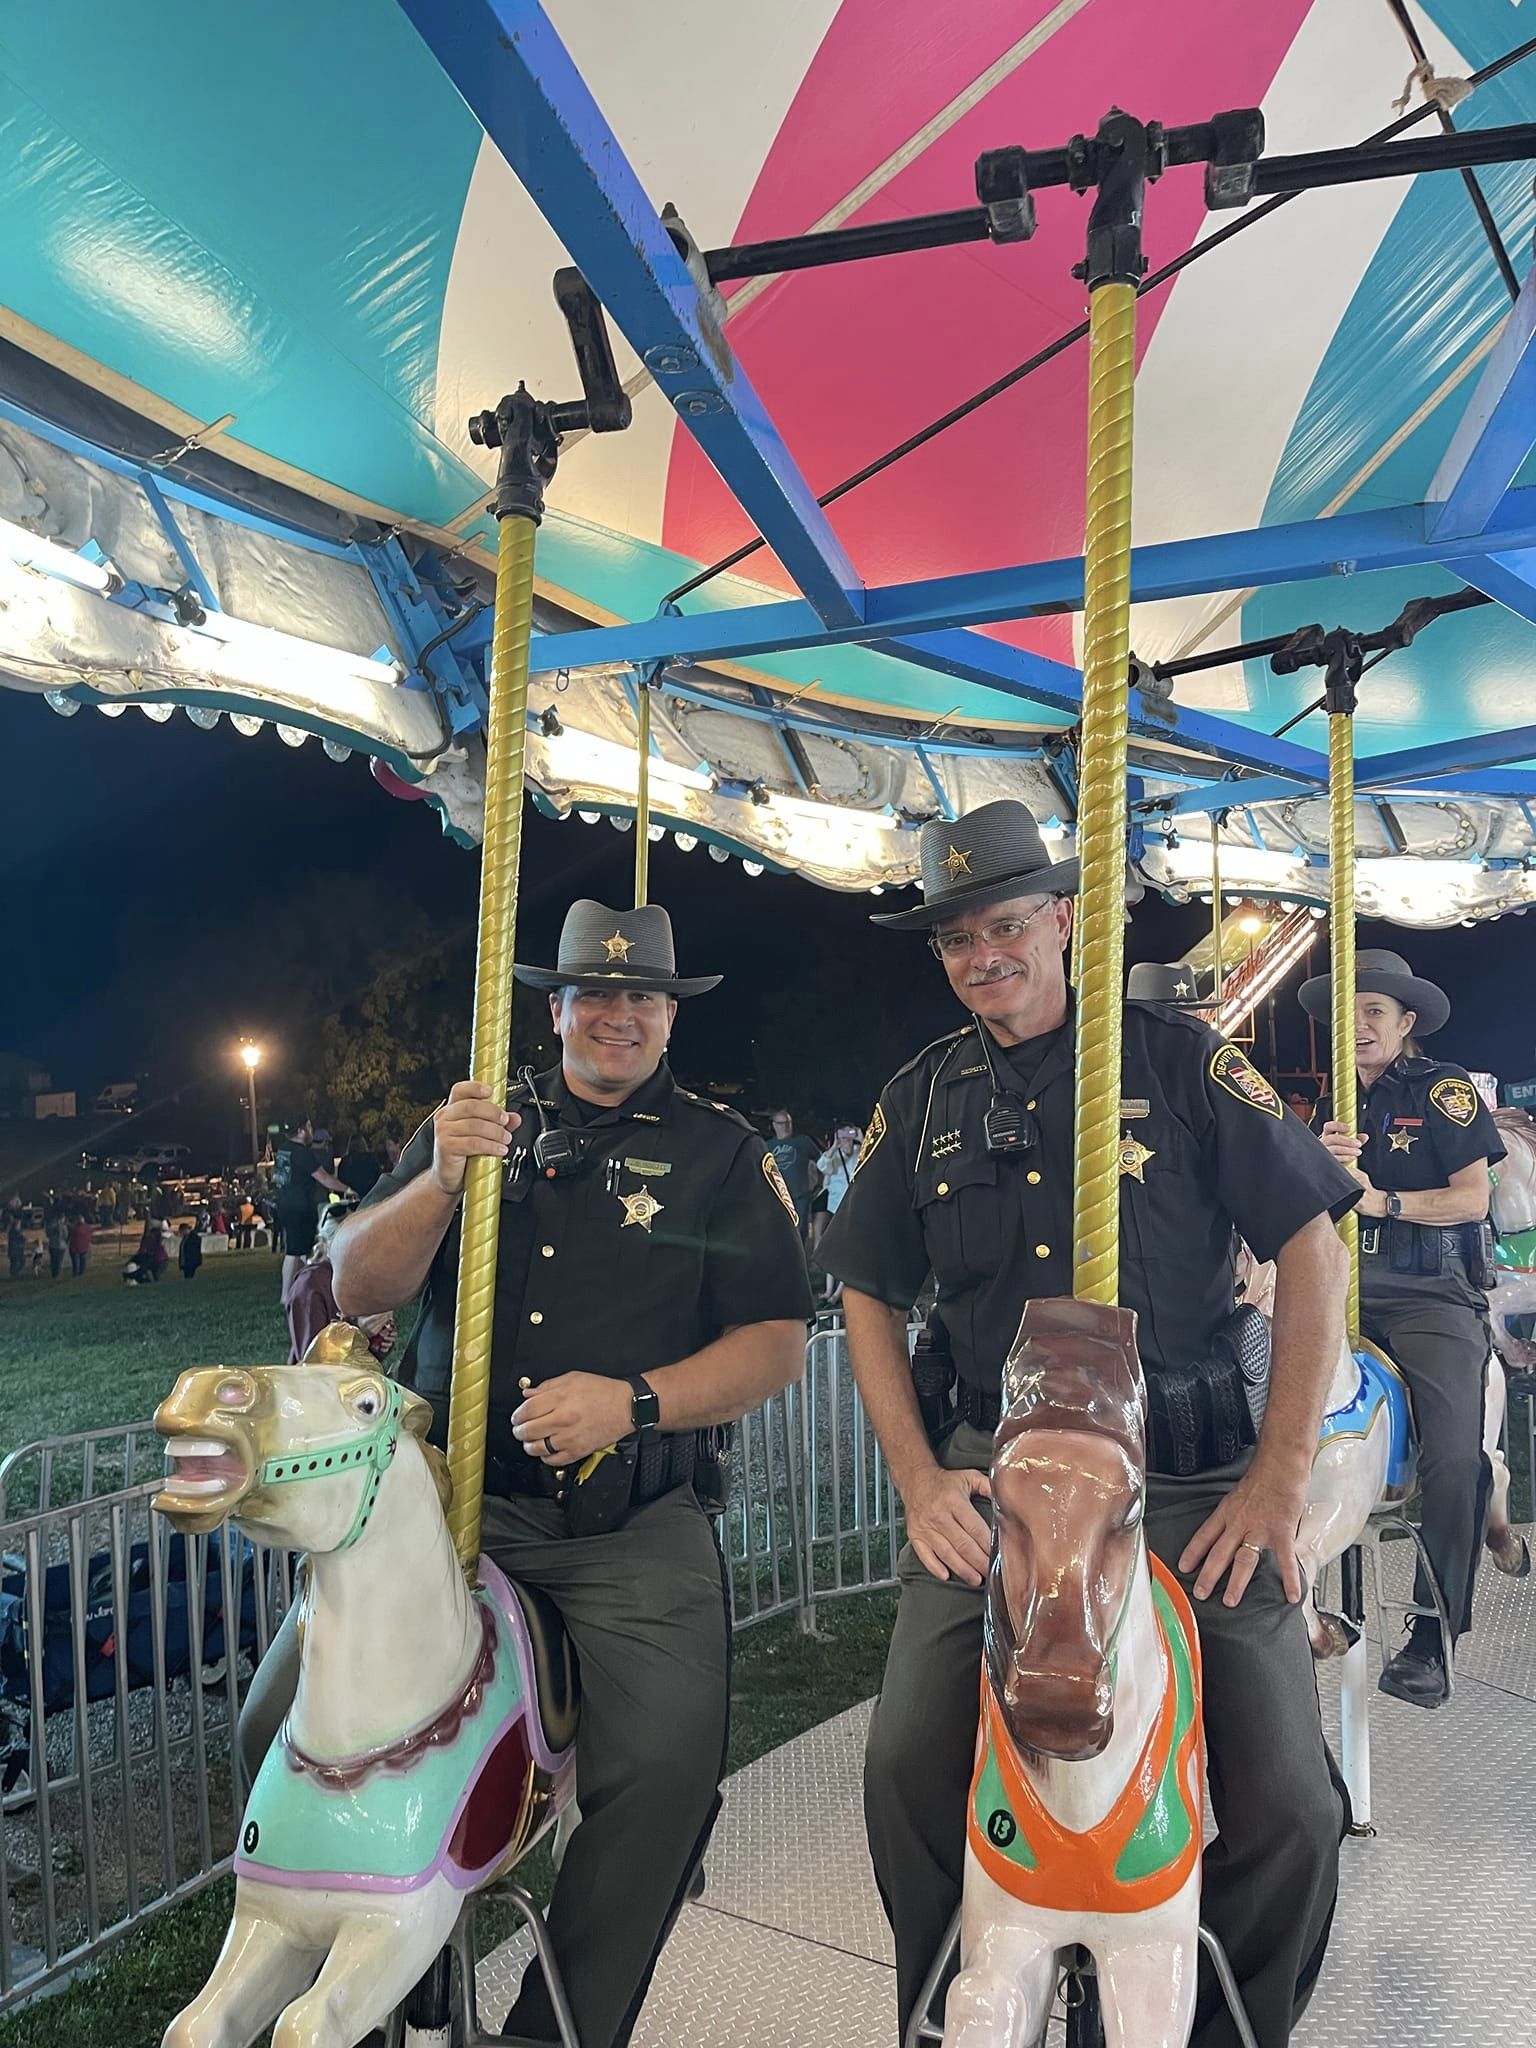 sheriffs on the horses on the merry go round